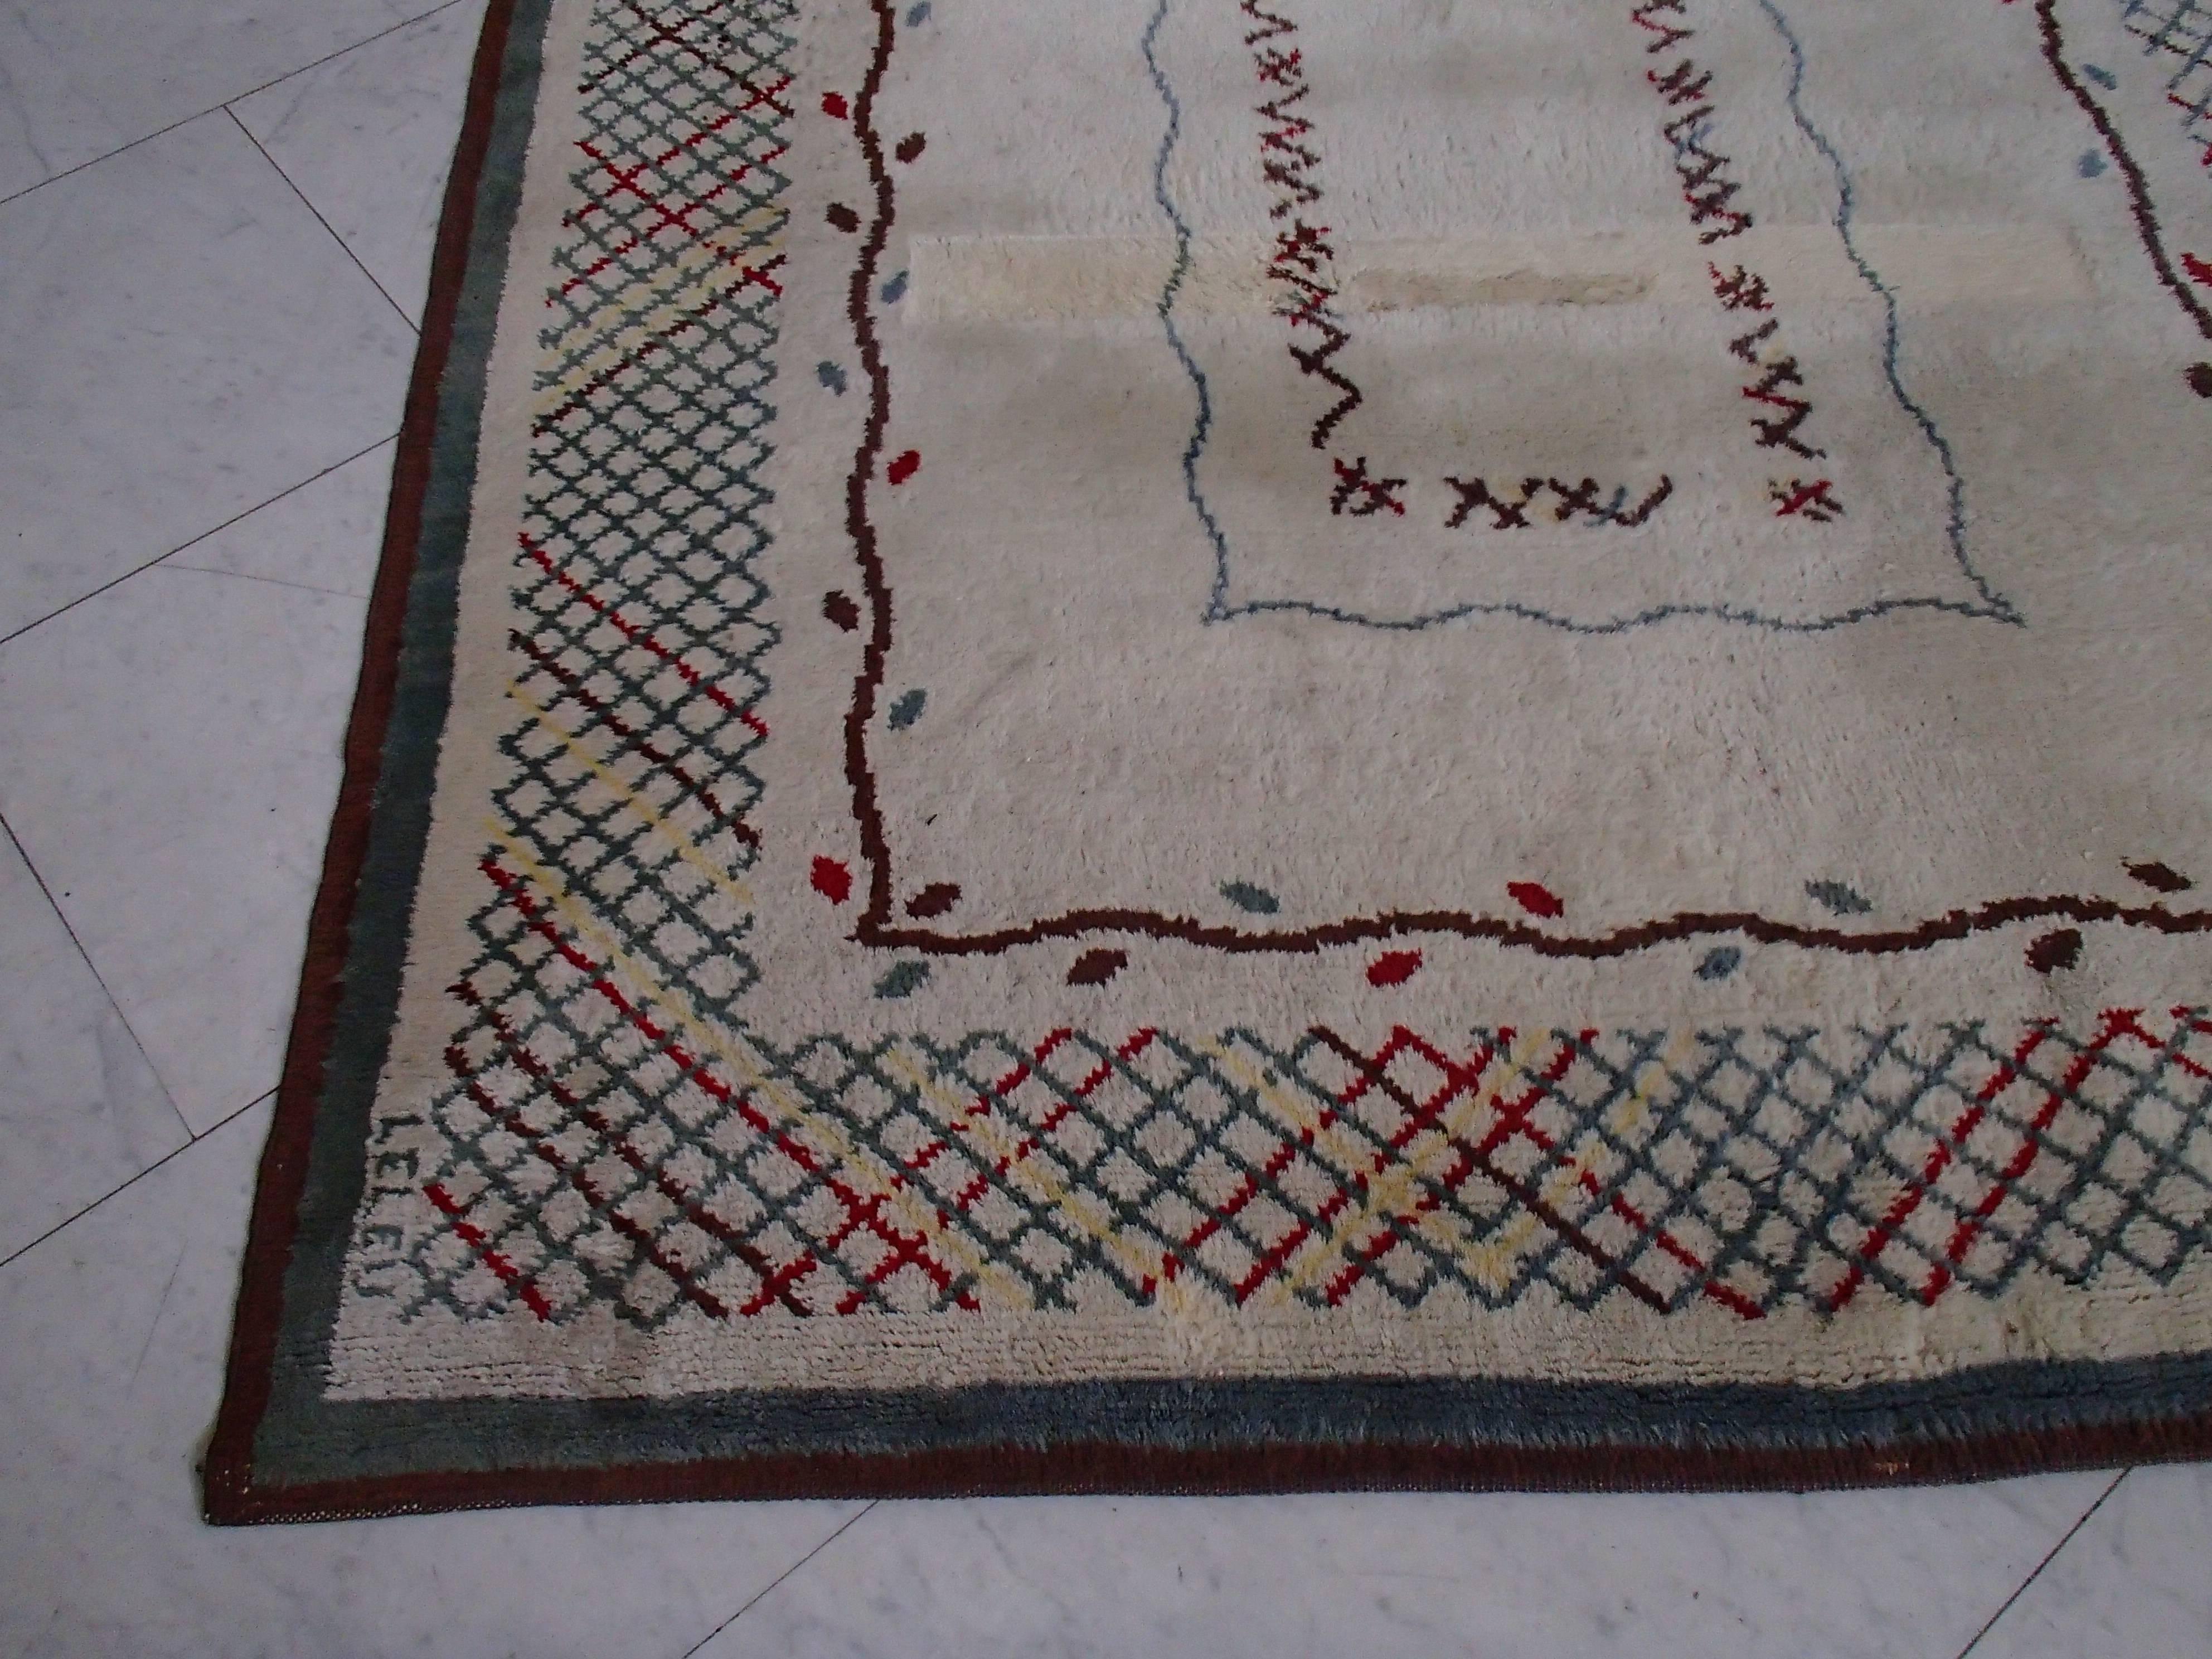 Midcentury carpet signed by Leleu. The marks on the carpet are from a table standing on it.